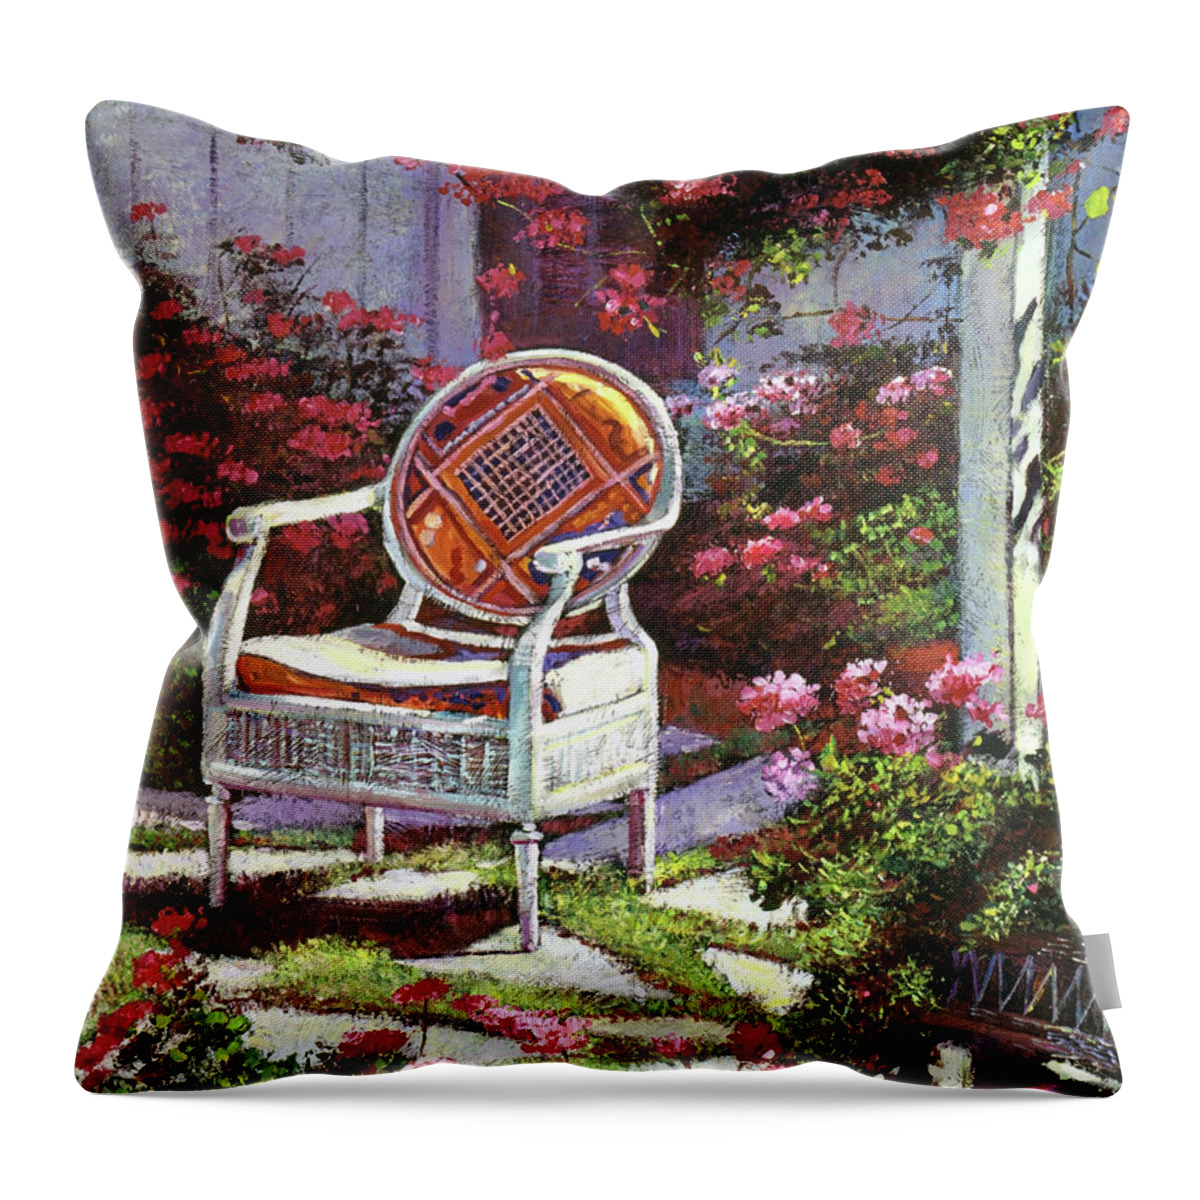 Gardens Throw Pillow featuring the painting Geraniums And Wicker by David Lloyd Glover